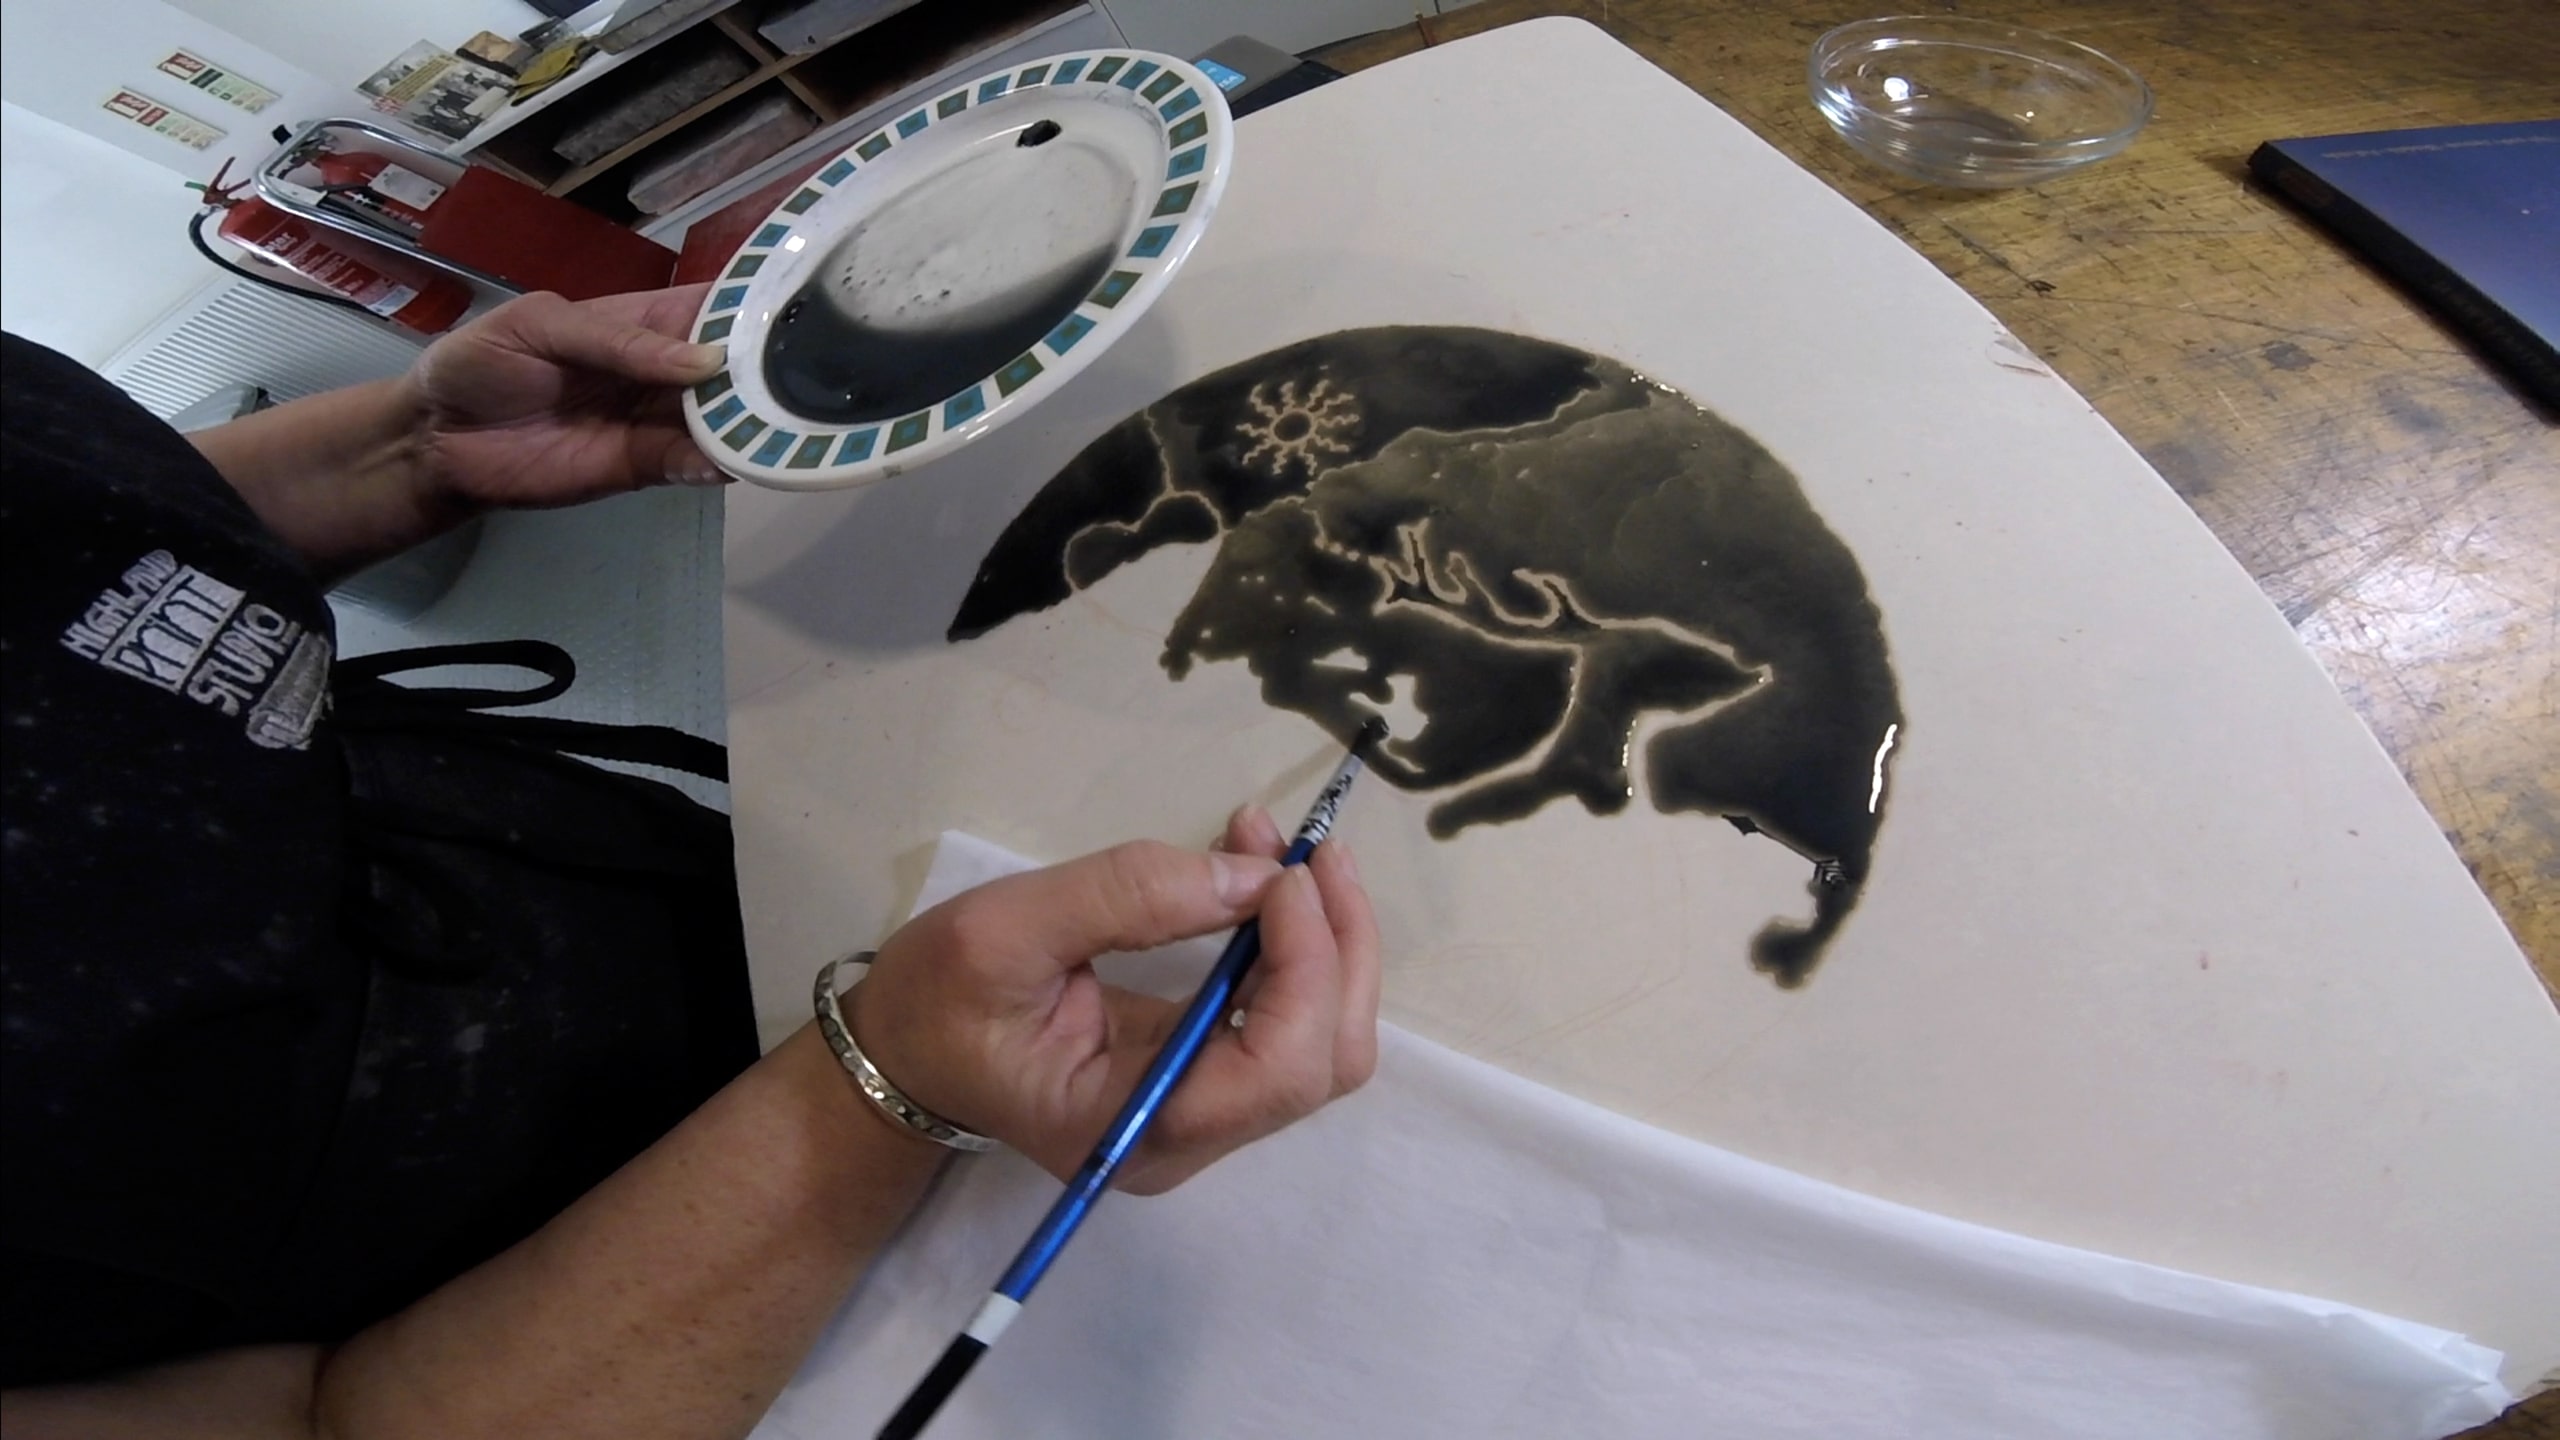 Stone Lithography taking place, with a person painting onto the stone with a grease-based paint